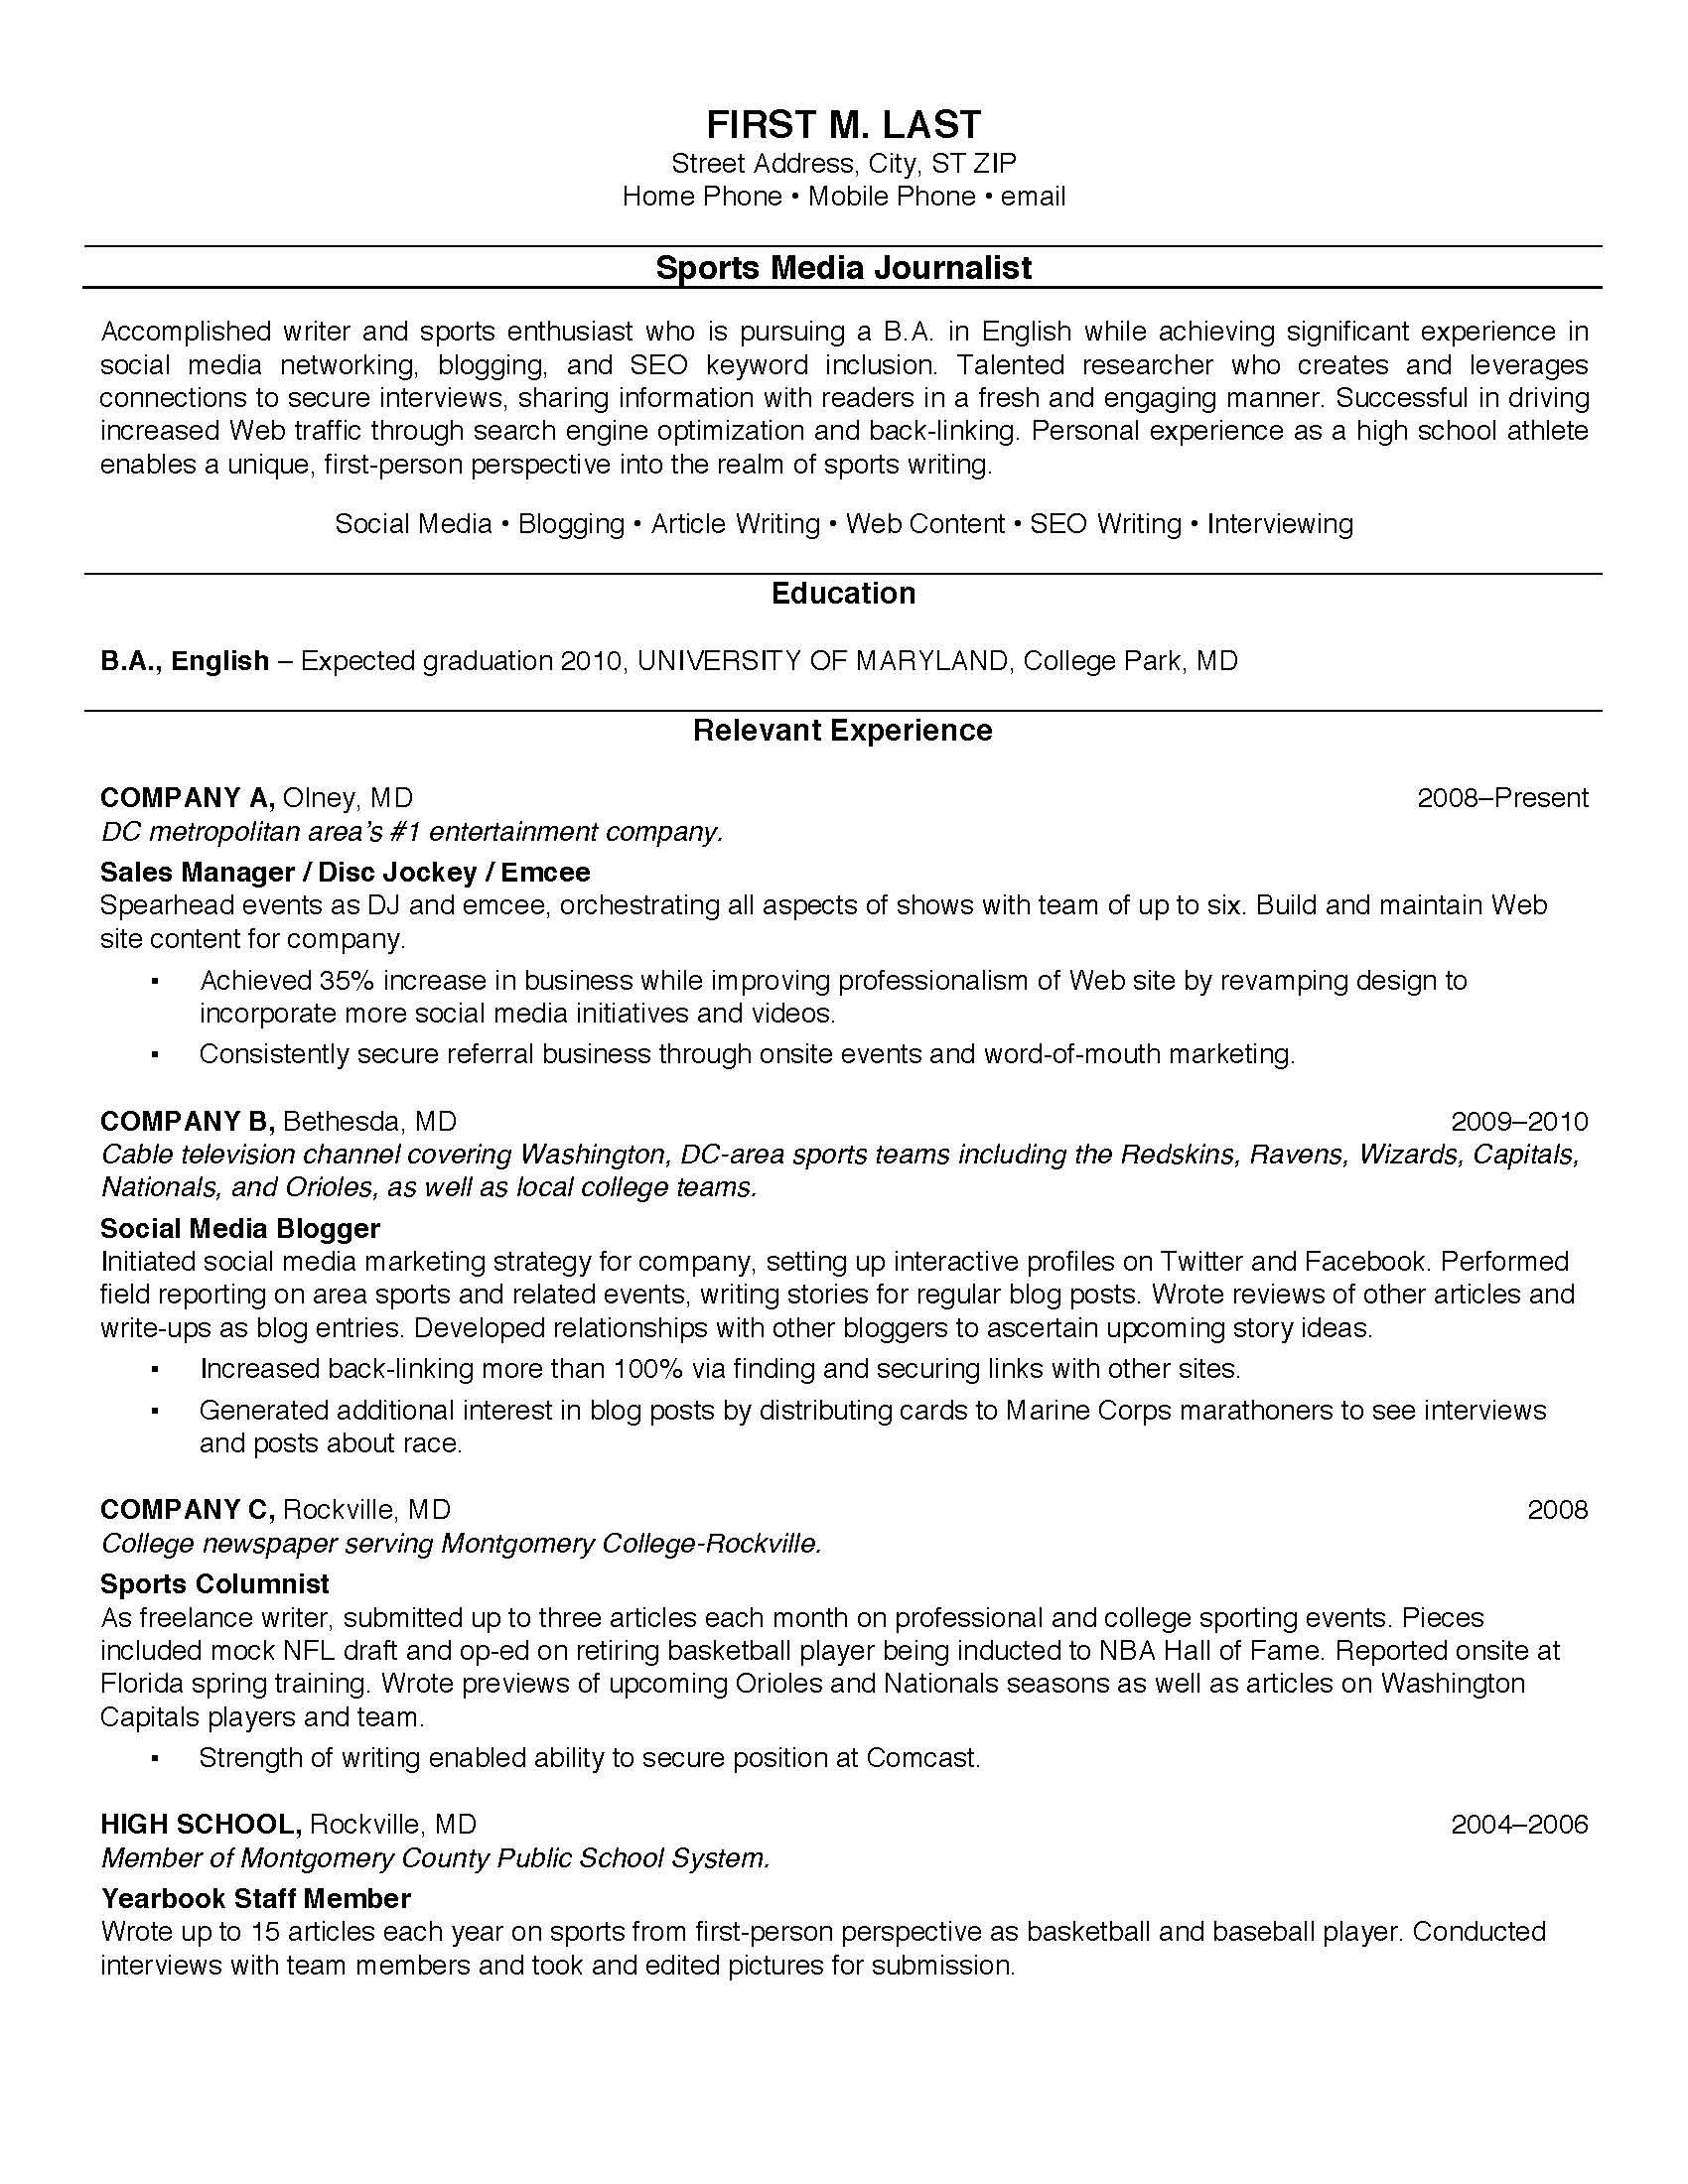 Resume Tips Objective Currentege Student Resume Samples For With No Work Experience Pdf